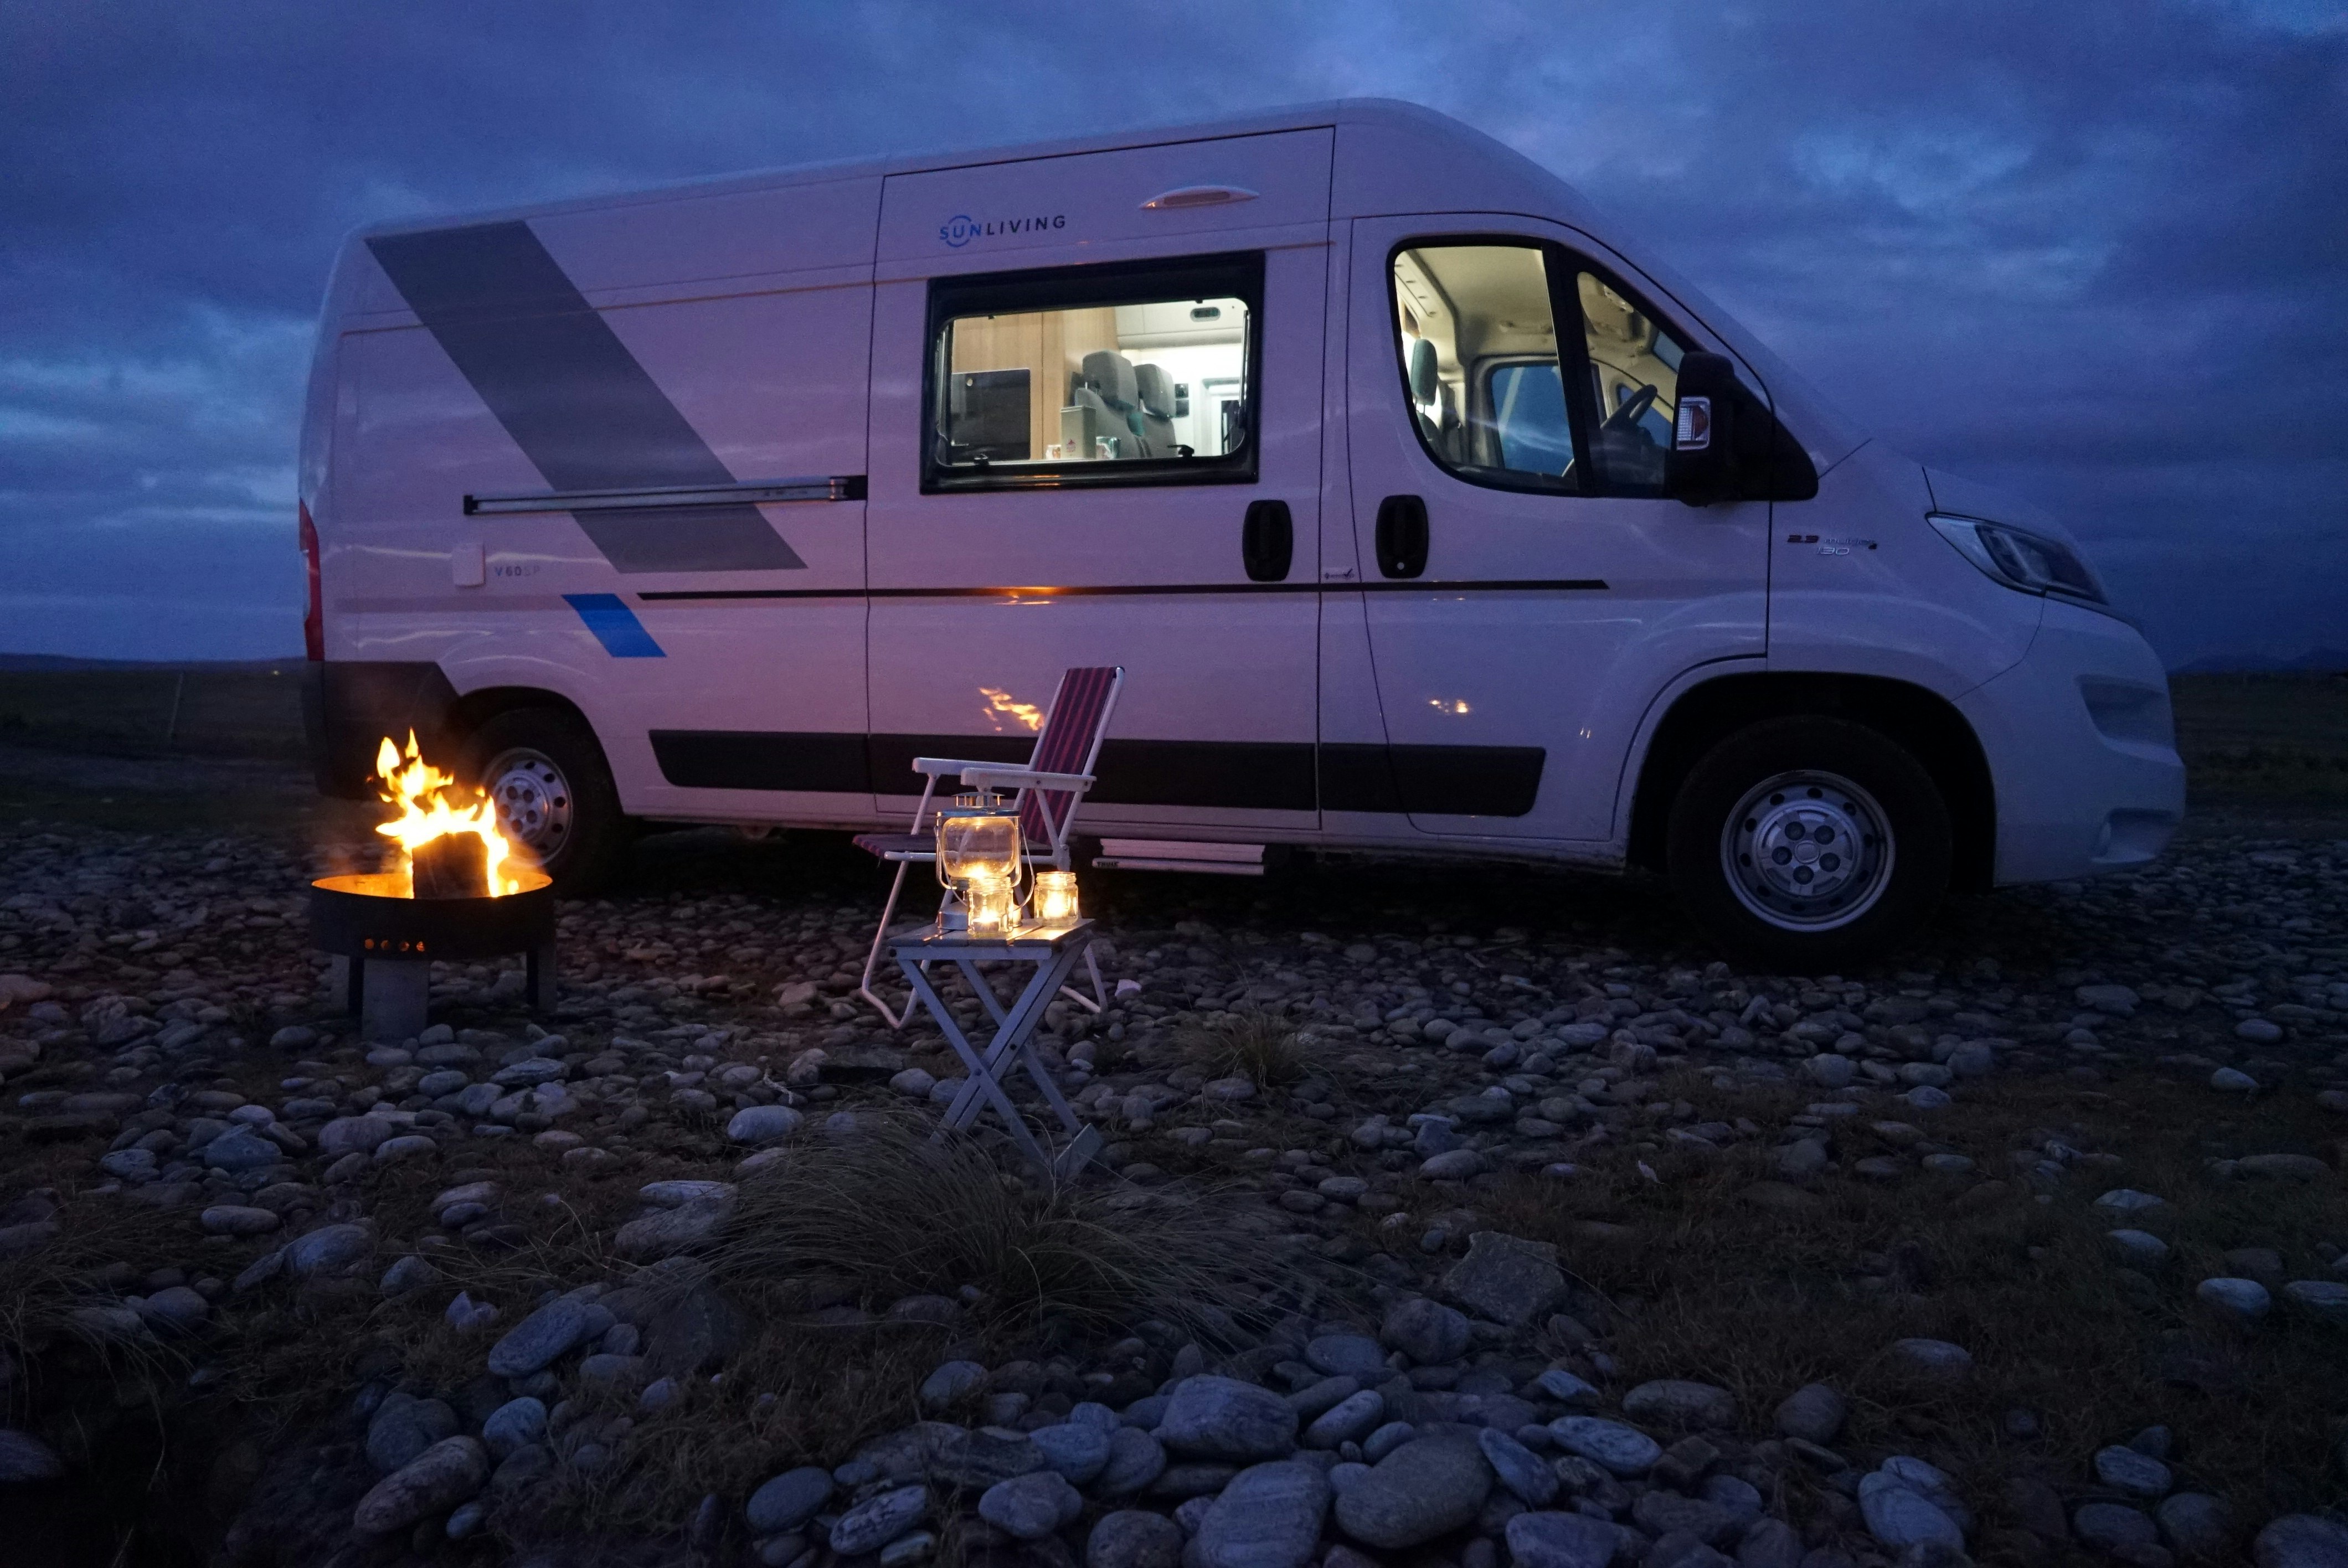 A large white van is parked in the middle of the wilderness. Next to it, a lone camping chair stands next to a small camp fire.